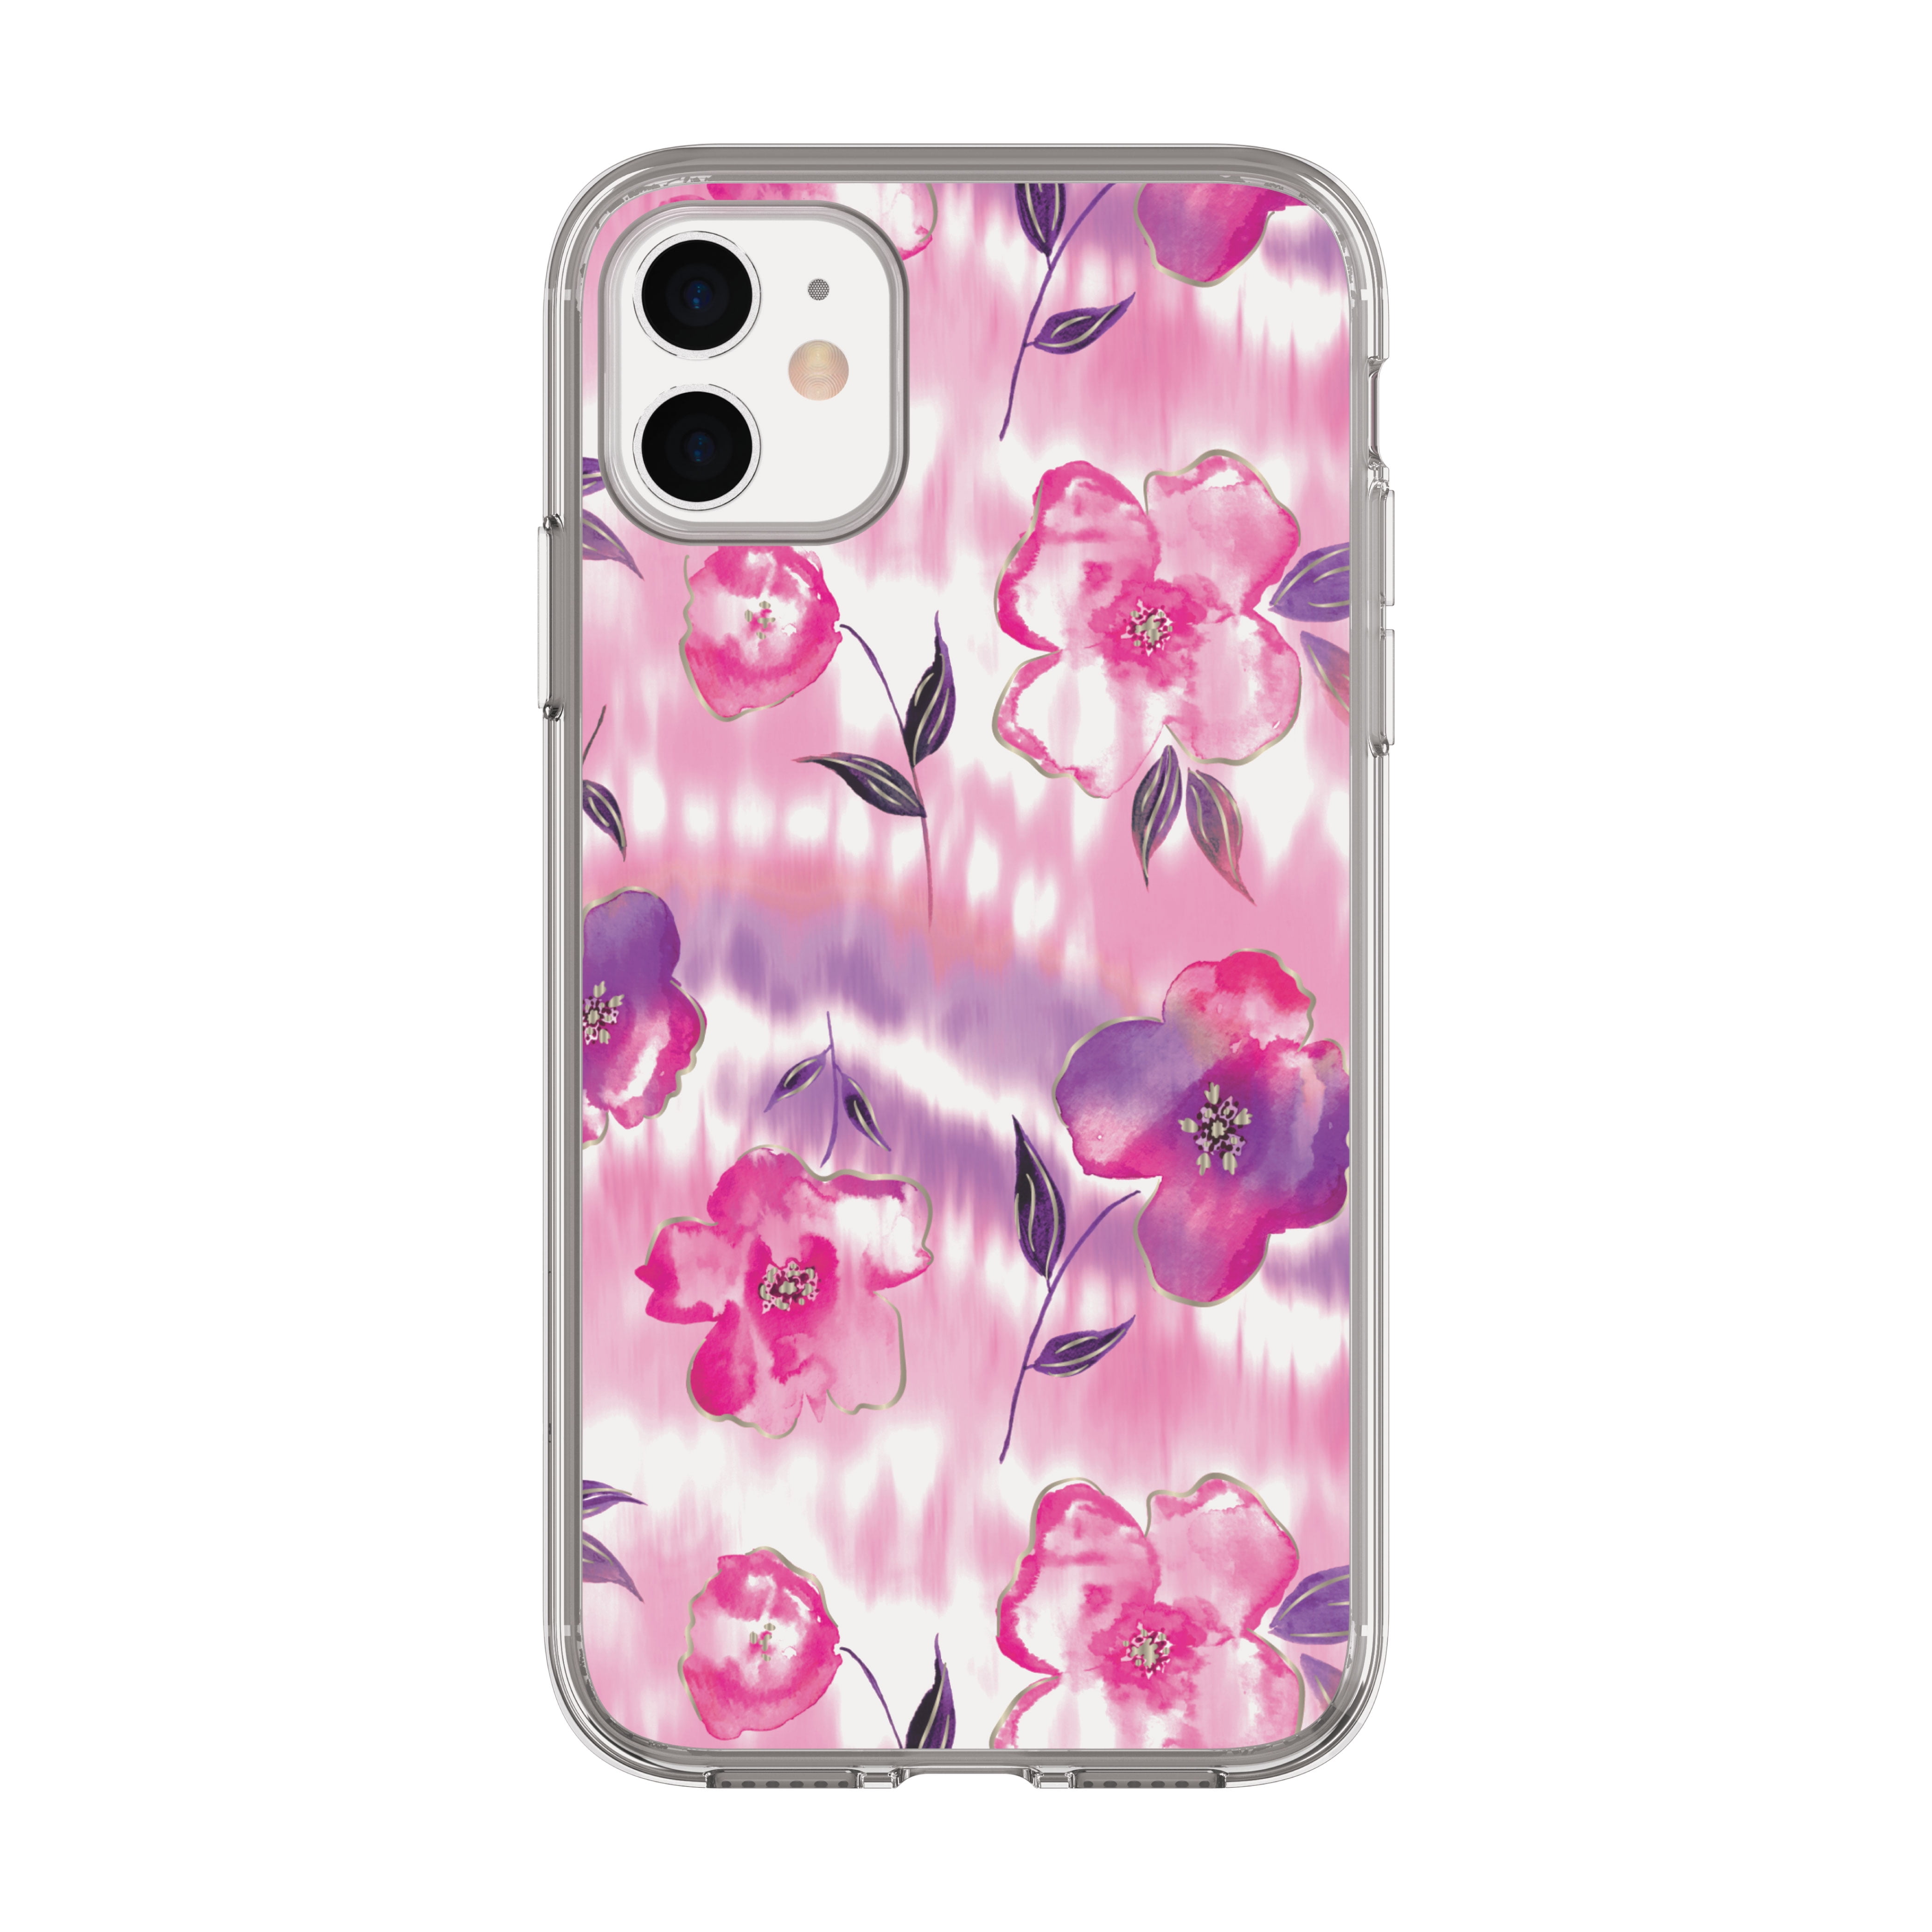 onn. Bright Floral Phone Case for iPhone 11 / iPhone XR